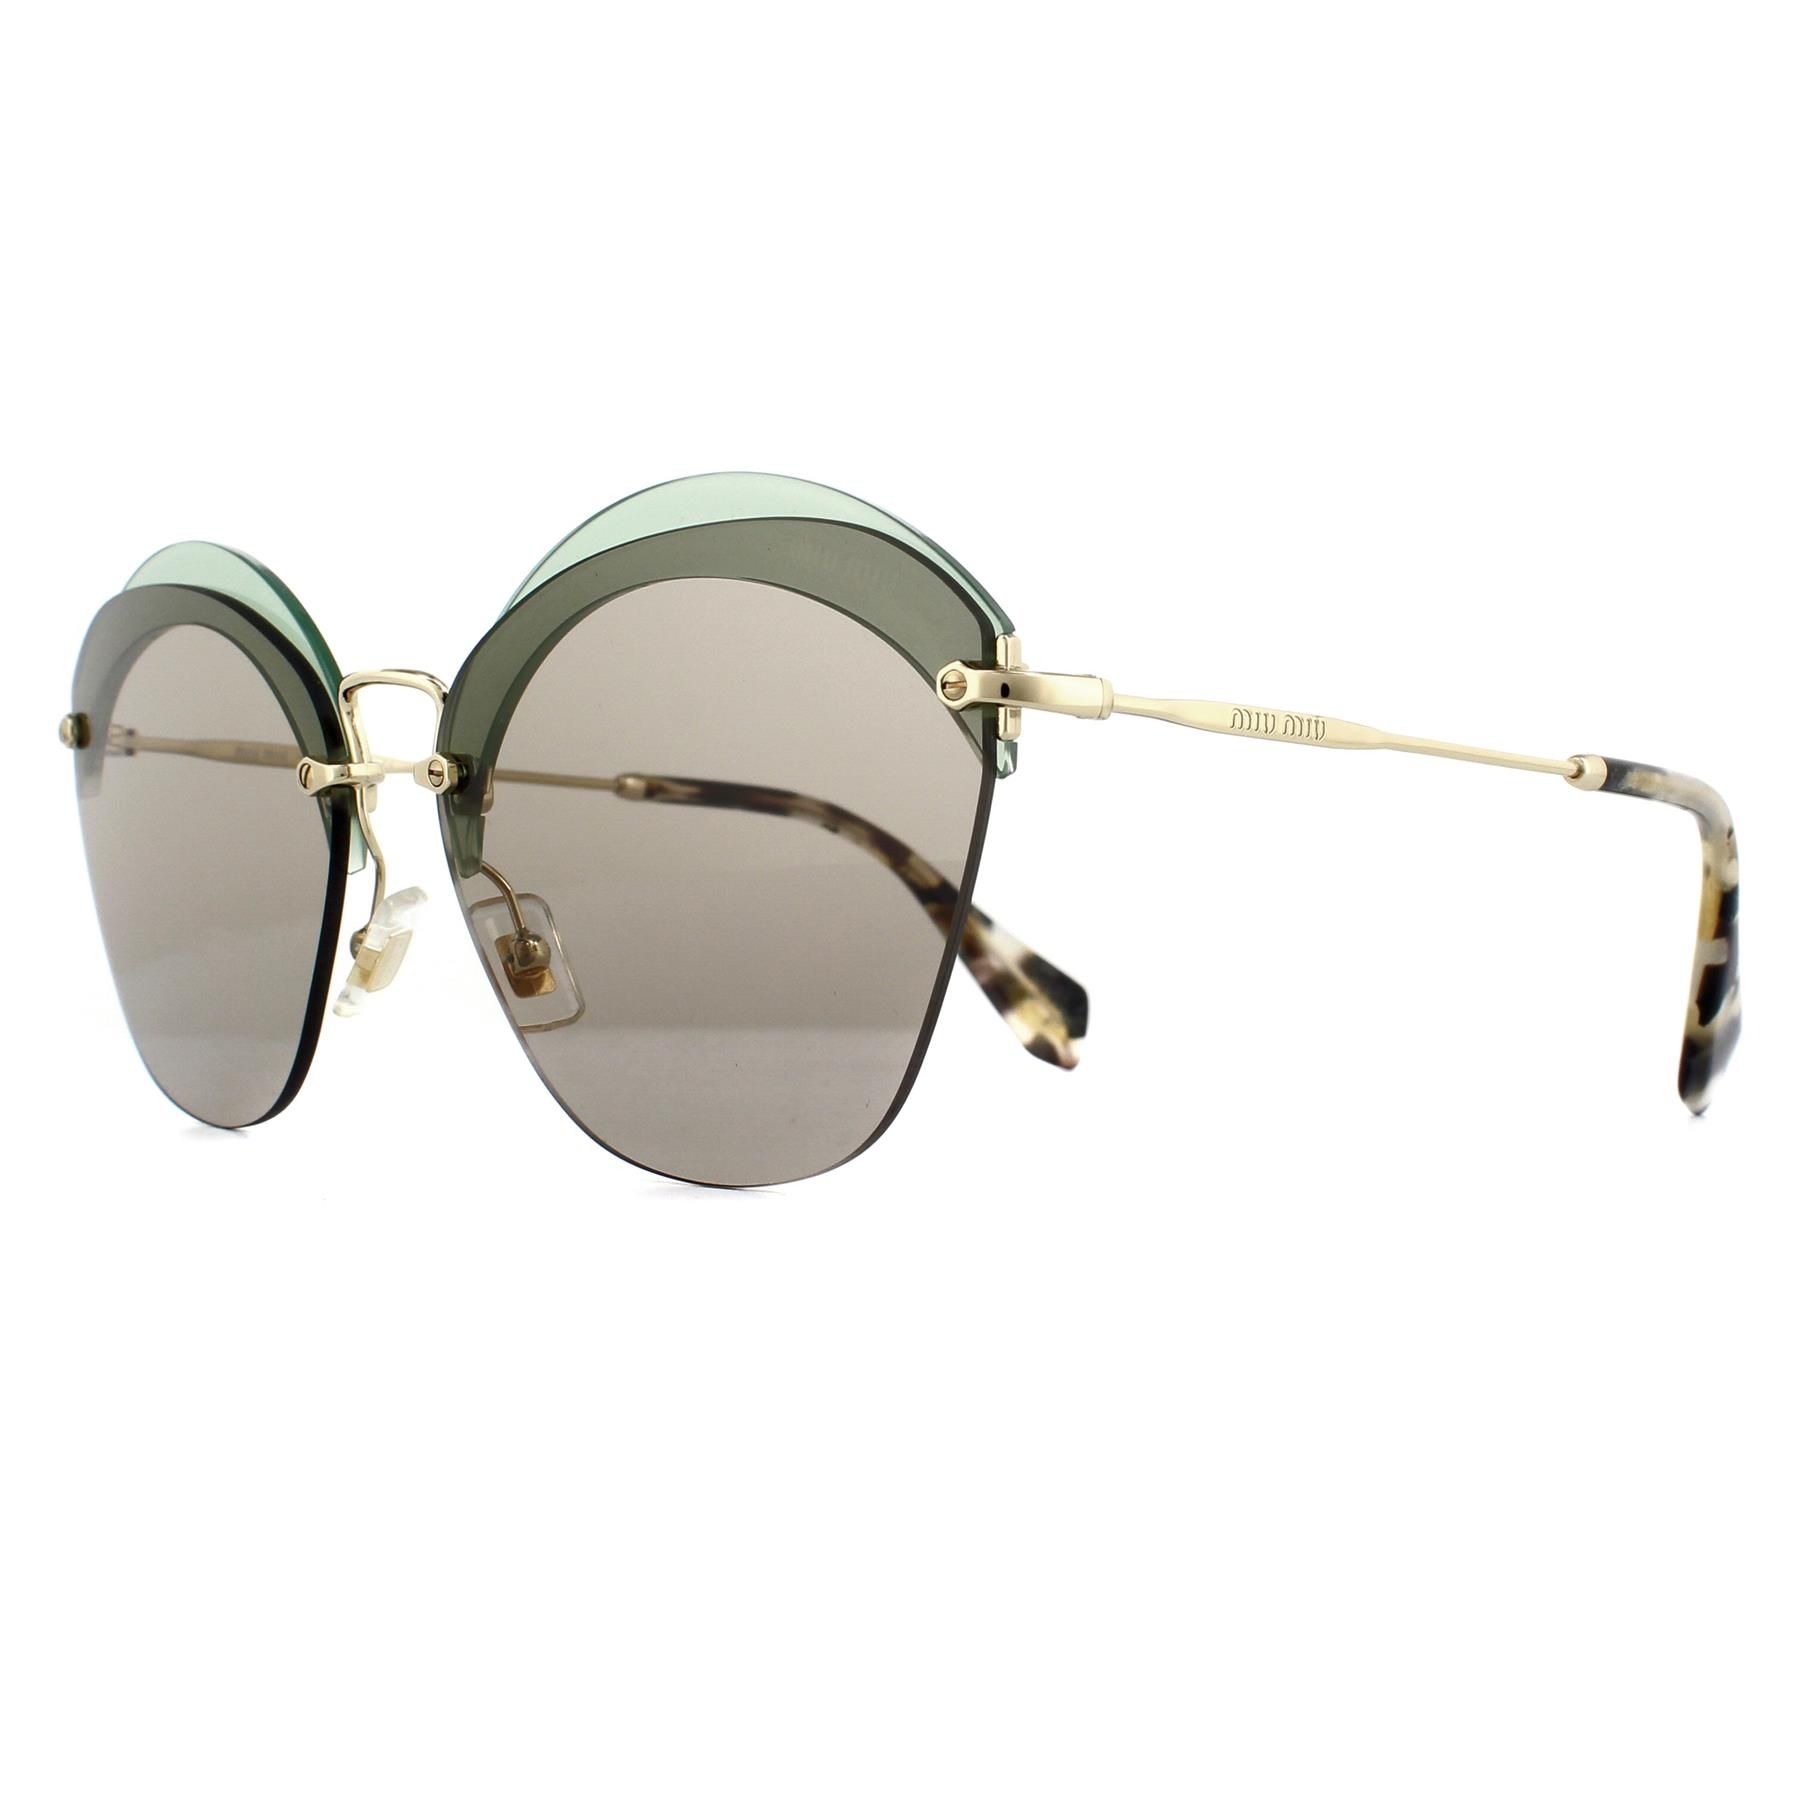 Miu Miu Sunglasses MU 53SS VX15J2 Green & Gold Light Brown have a multi-dimensional look with 2 lenses and slim metal arms for a really poised elegant finish with typical Miu Miu panache